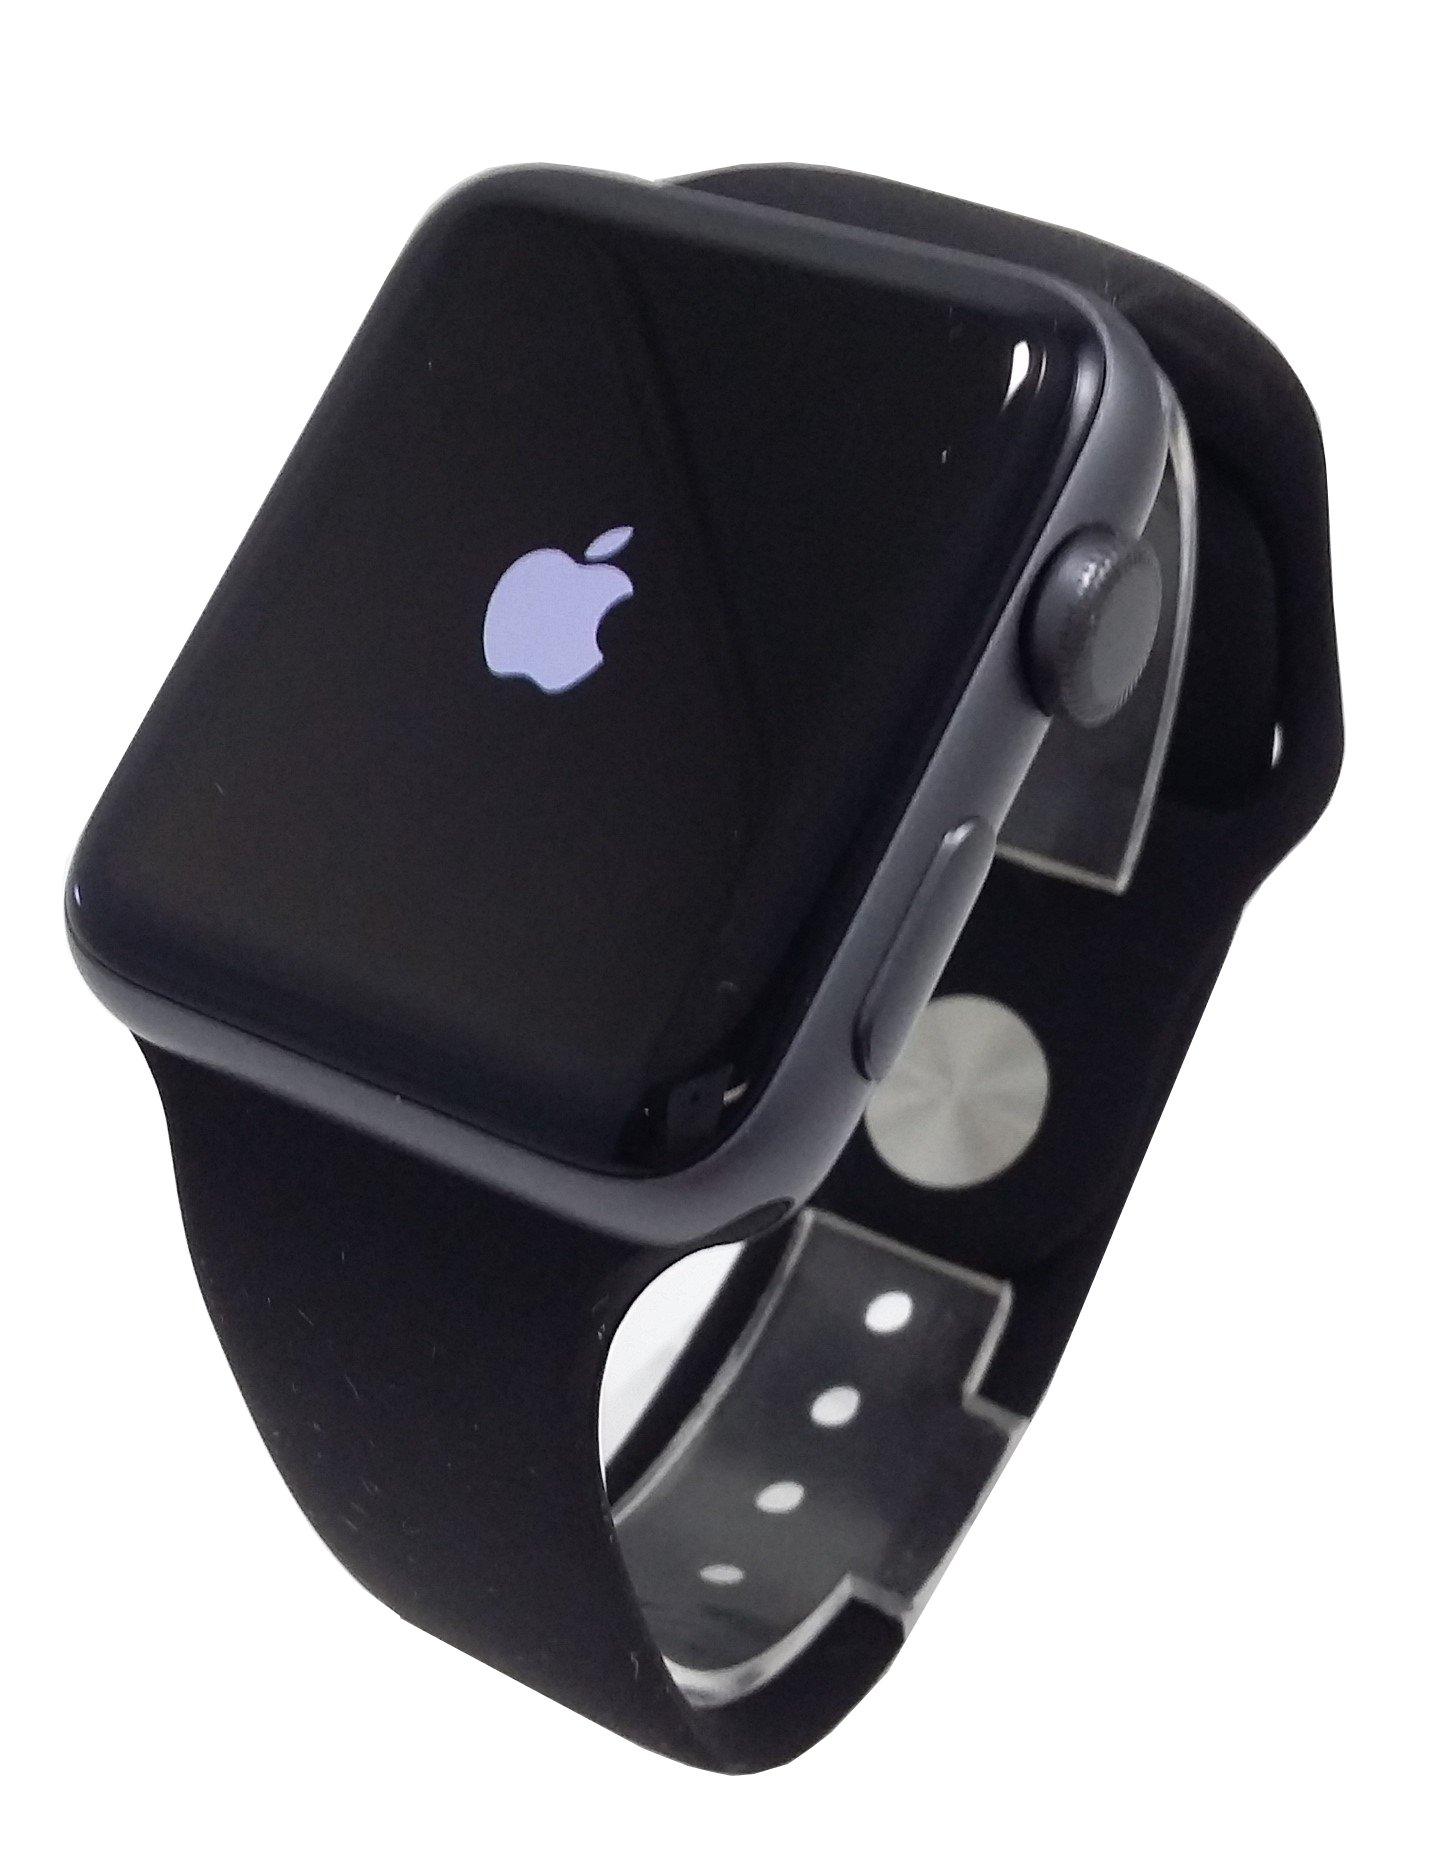 Apple Watch Series 2 Gray Shop Clothing Shoes Online